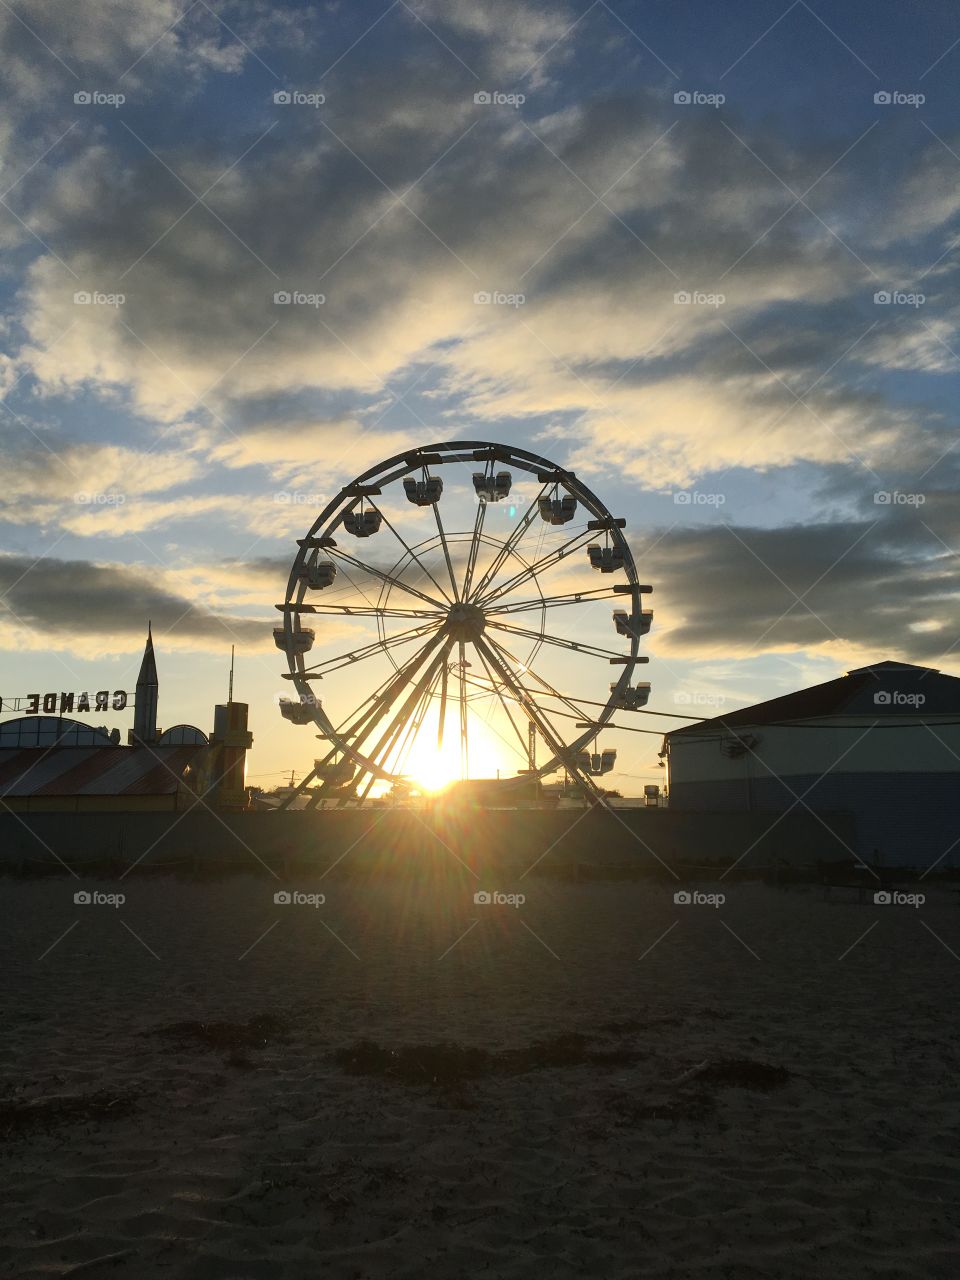 A beachside Ferris wheel sits above the pier. A reminder of the summer days as the sun sets behind the ride